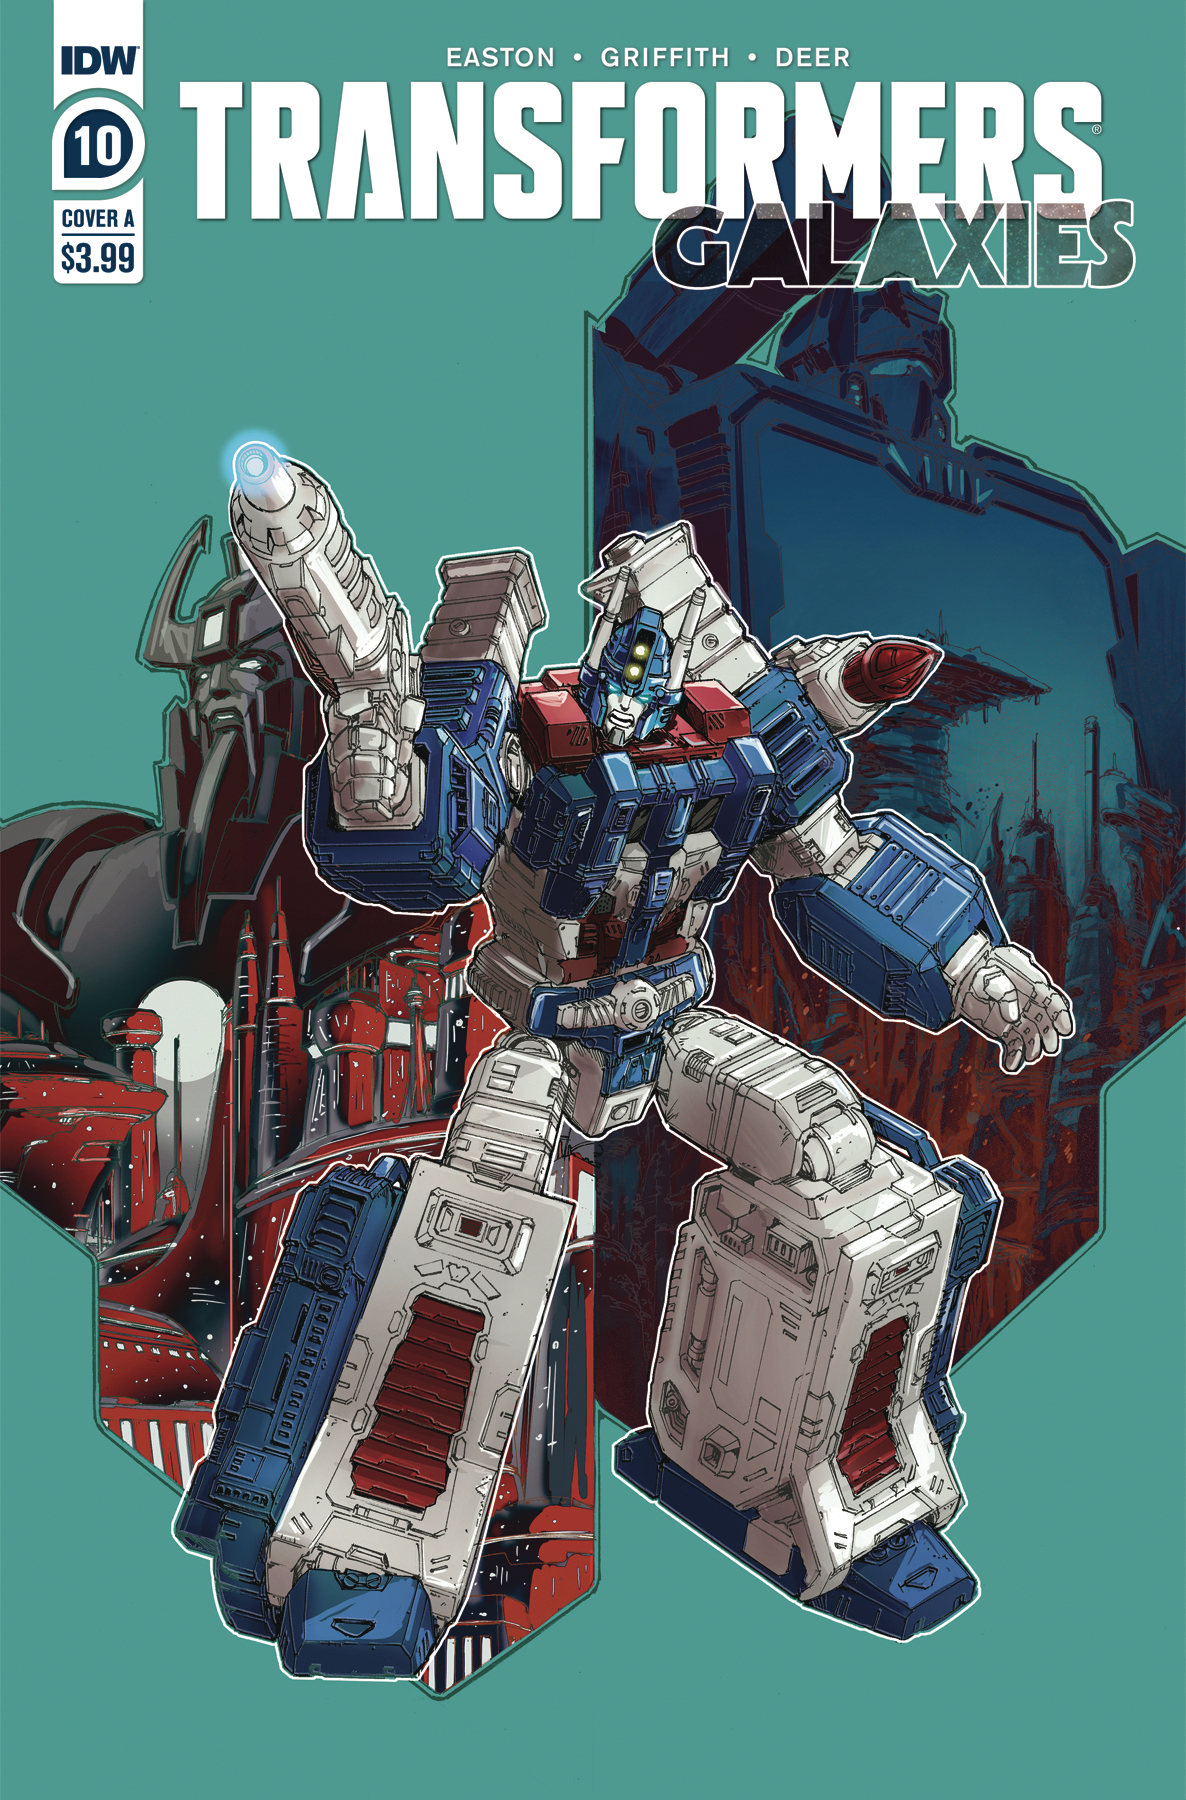 Transformers Galaxies #10 Cover A Griffith